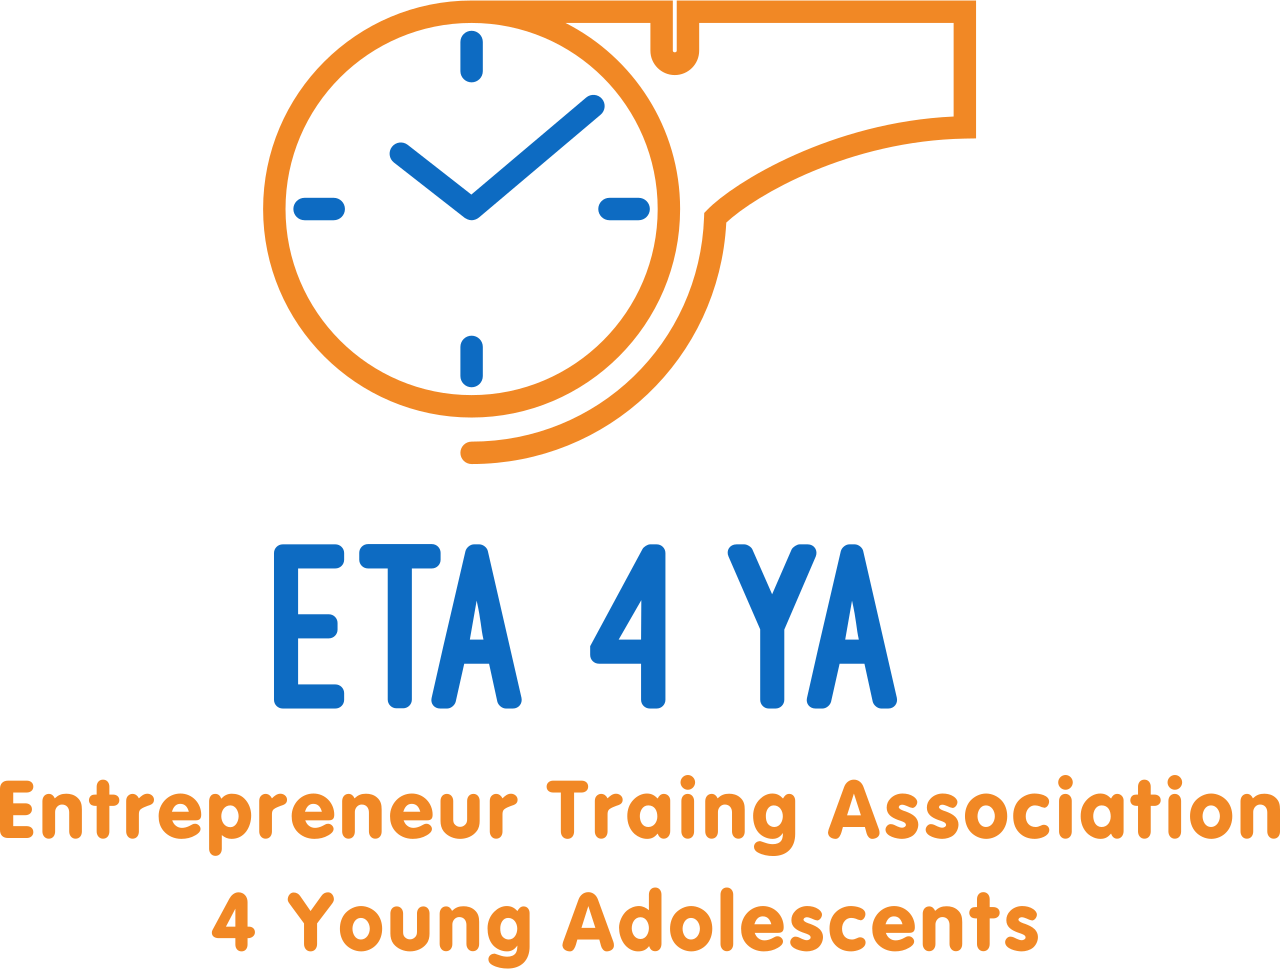 Entrepreneur training association for young adolescents 's web page